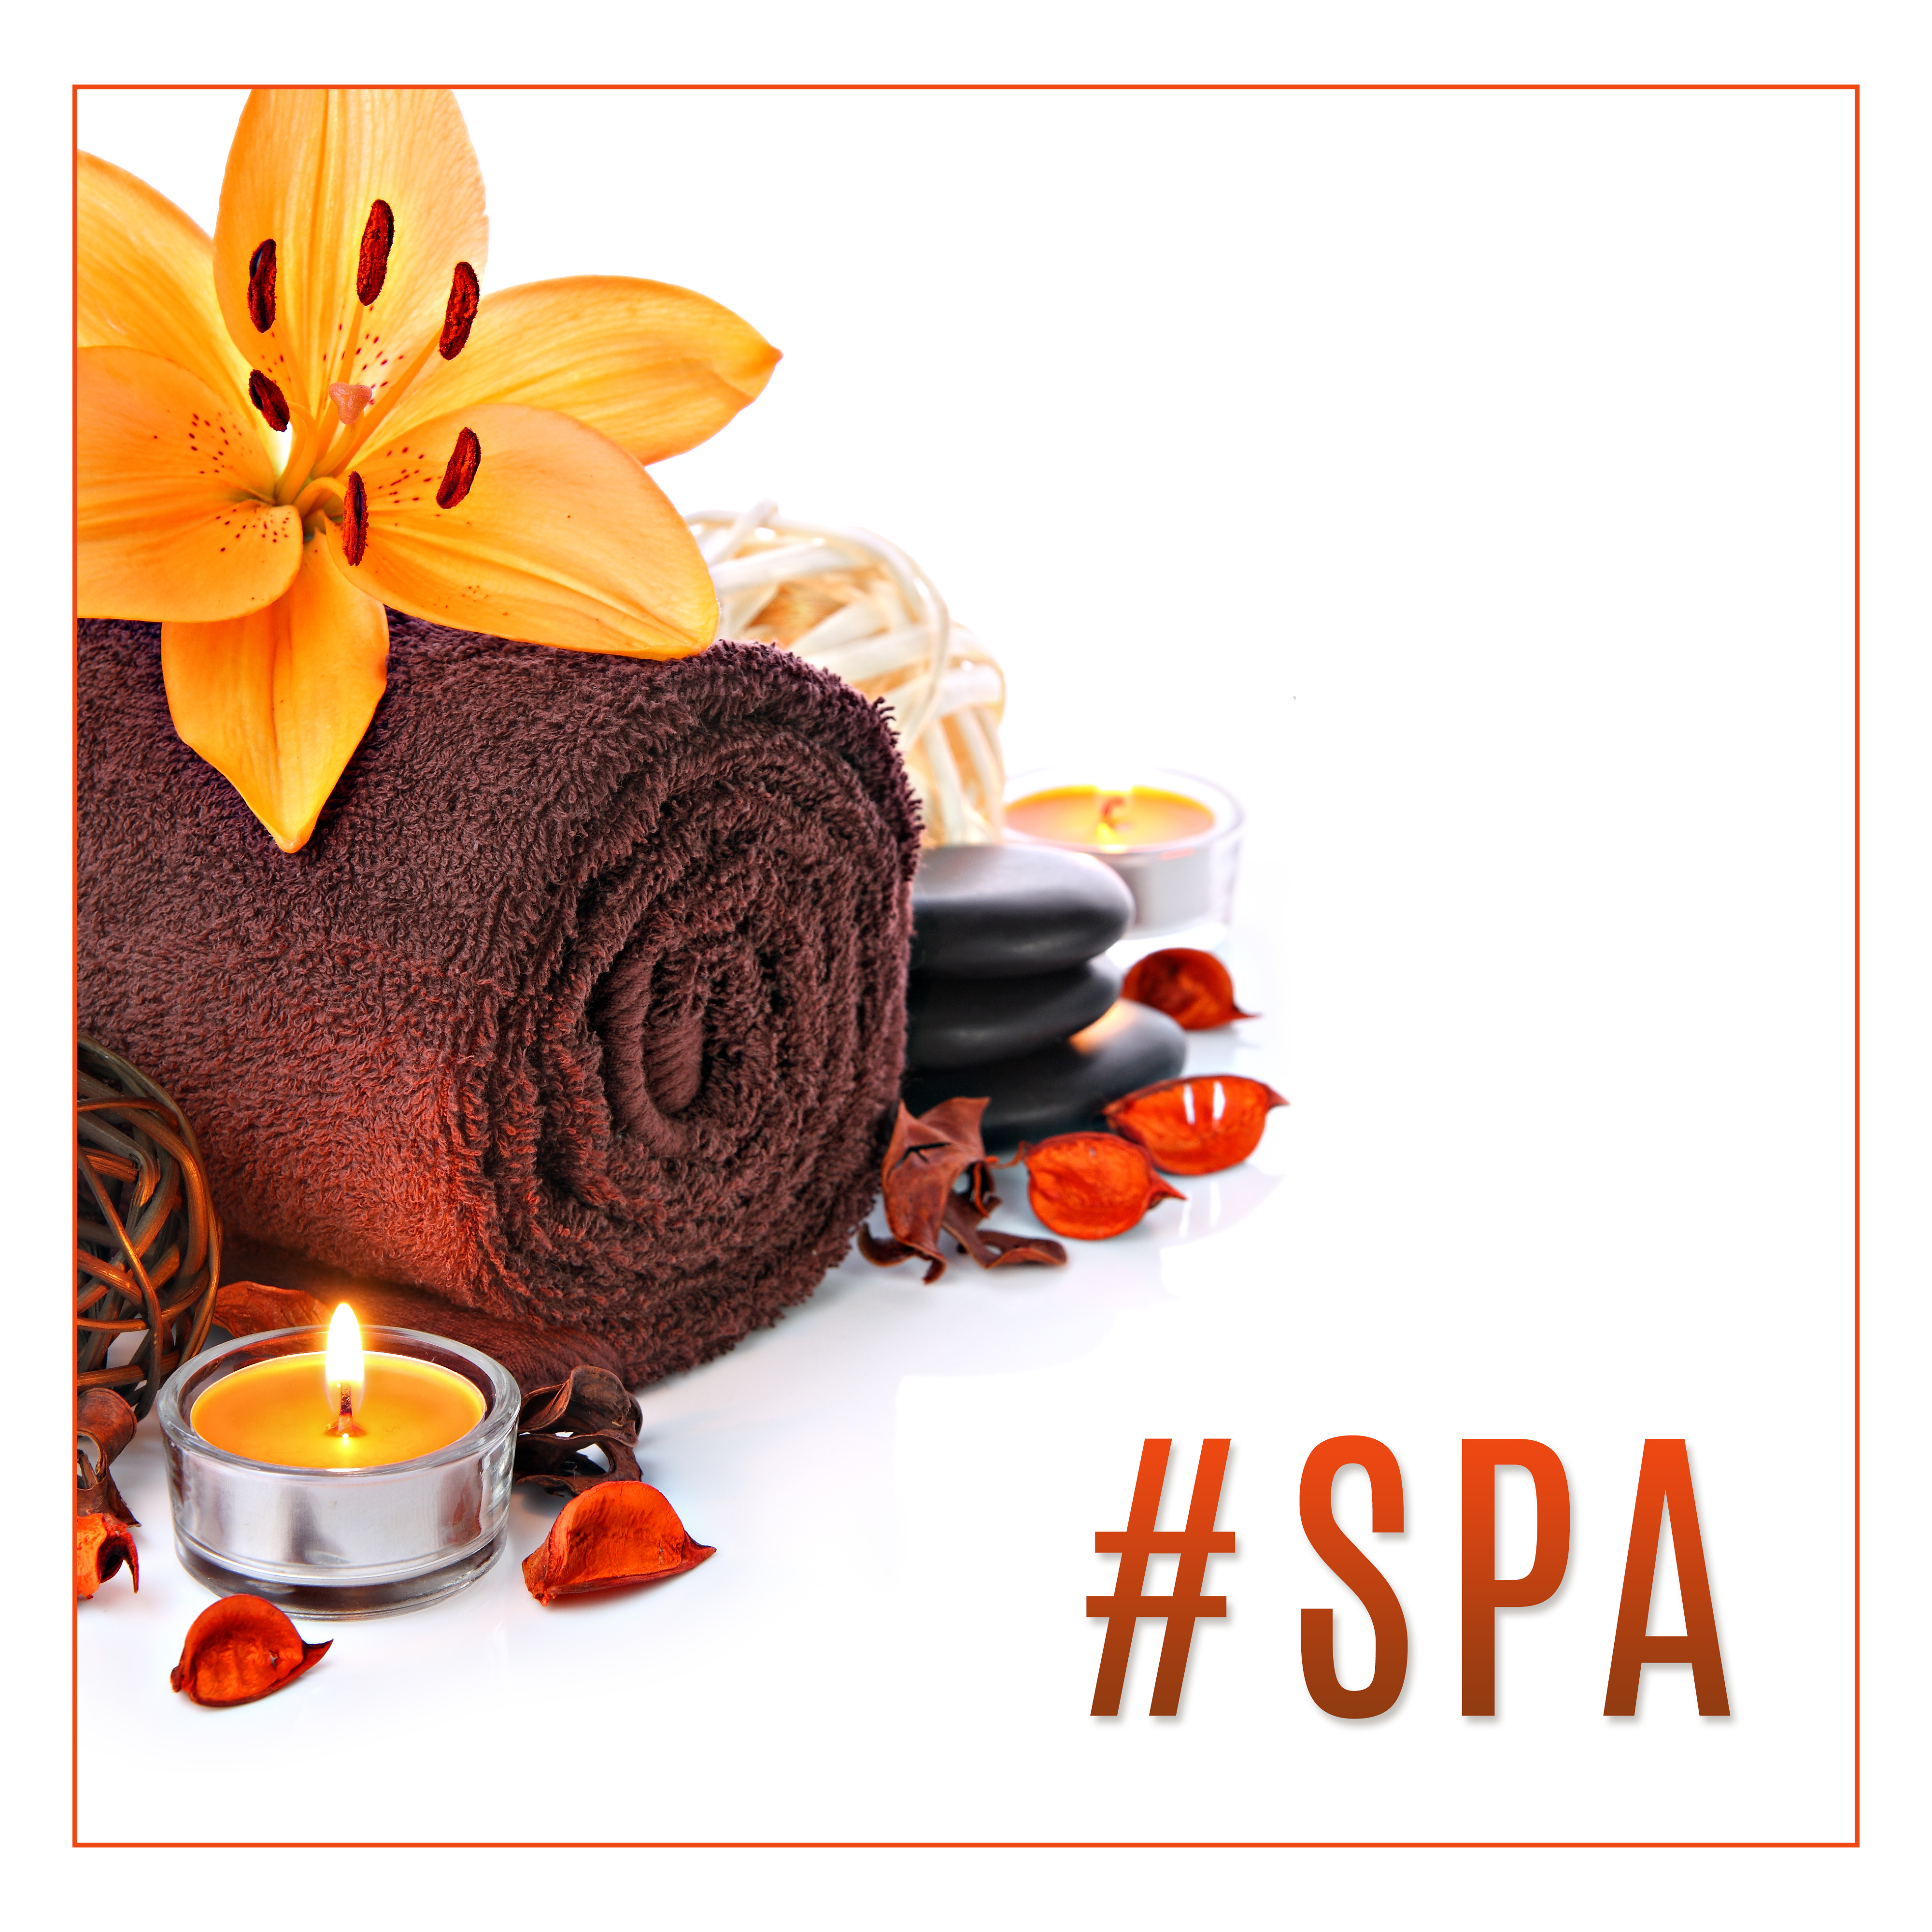 #Spa – Music for Massage, Wellness, Relaxation, Stress Relief, Deep Meditation, Nature Sounds to Calm Down